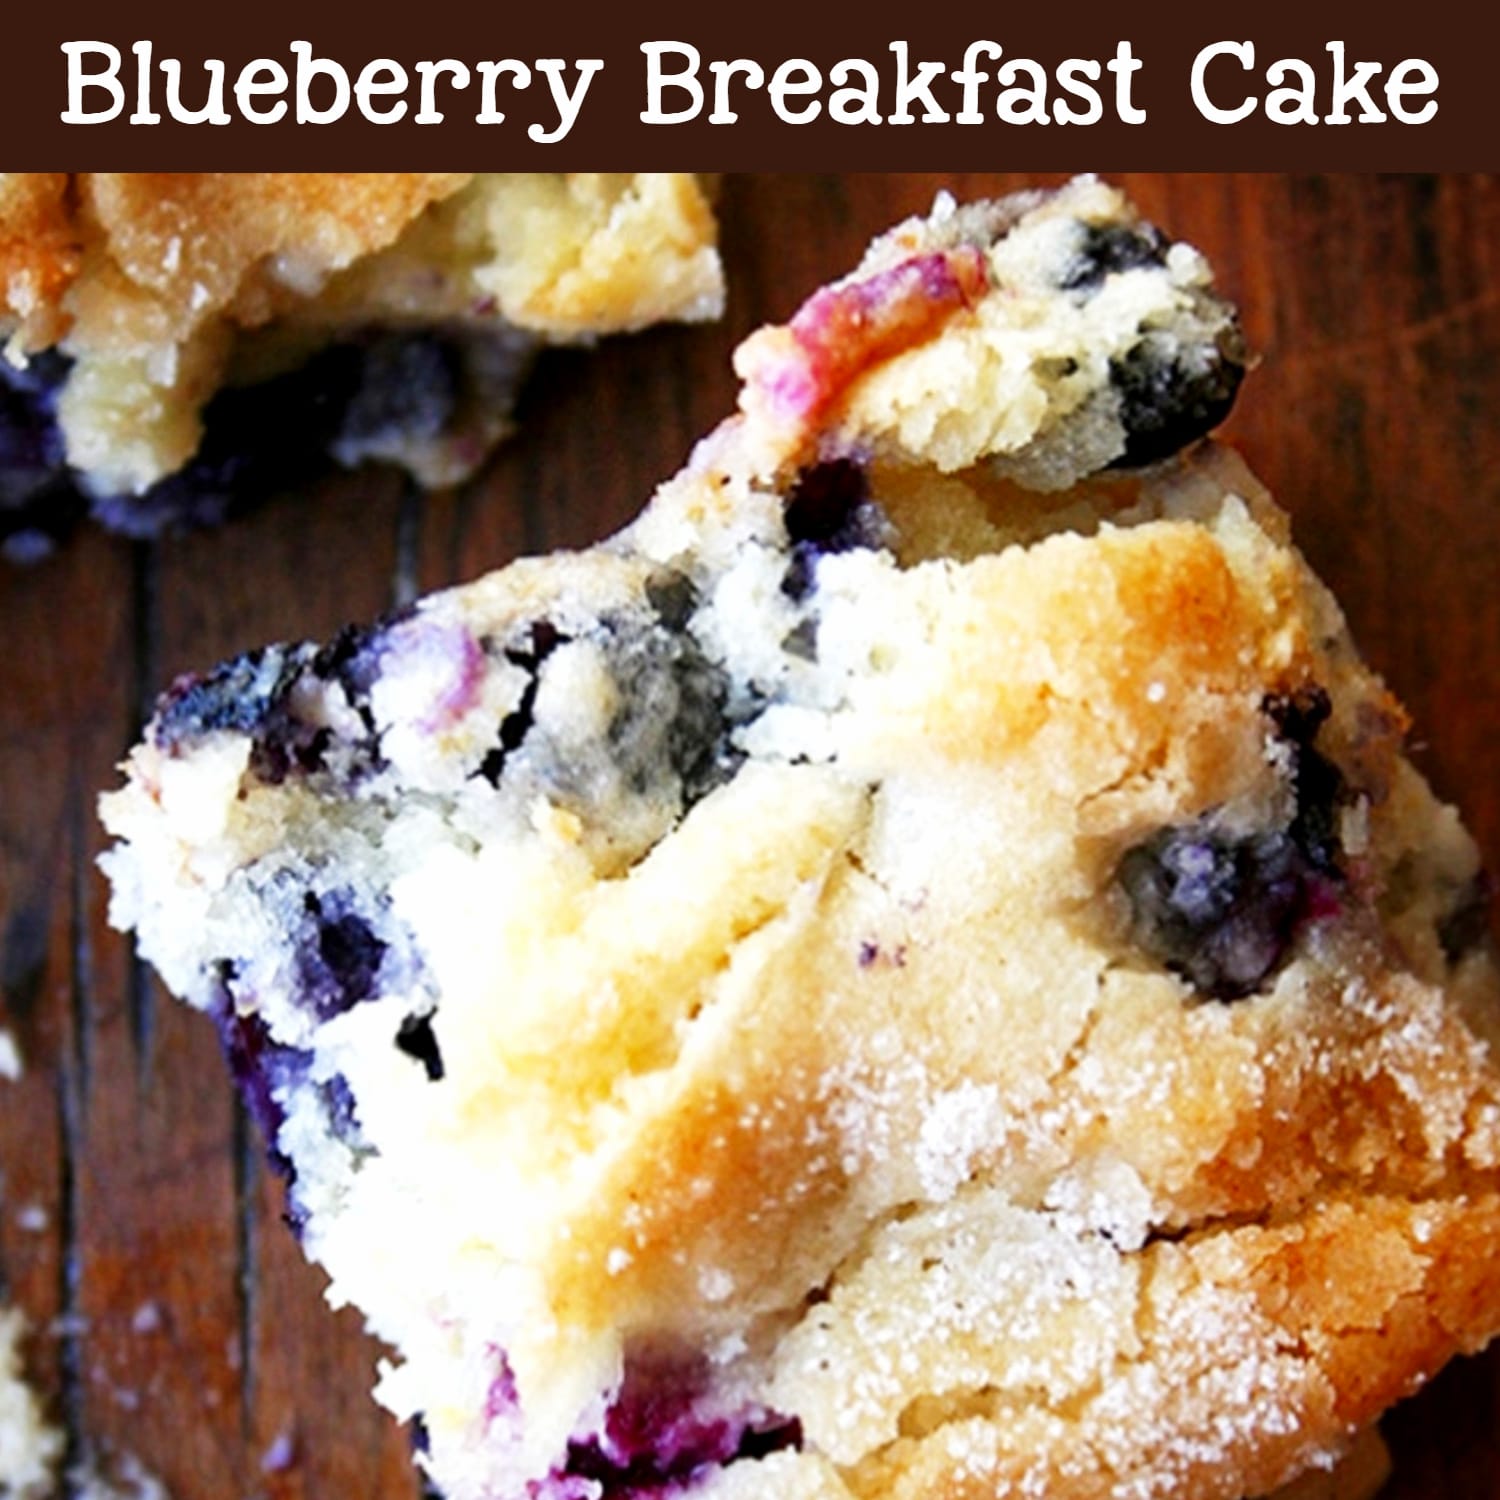 Easy make ahead breakfast and brunch for a crowd - simple breakfast cake recipes - this blueberry coffee cake is perfect brunch food ideas for a crowd and simple breakfast ideas for guests and company